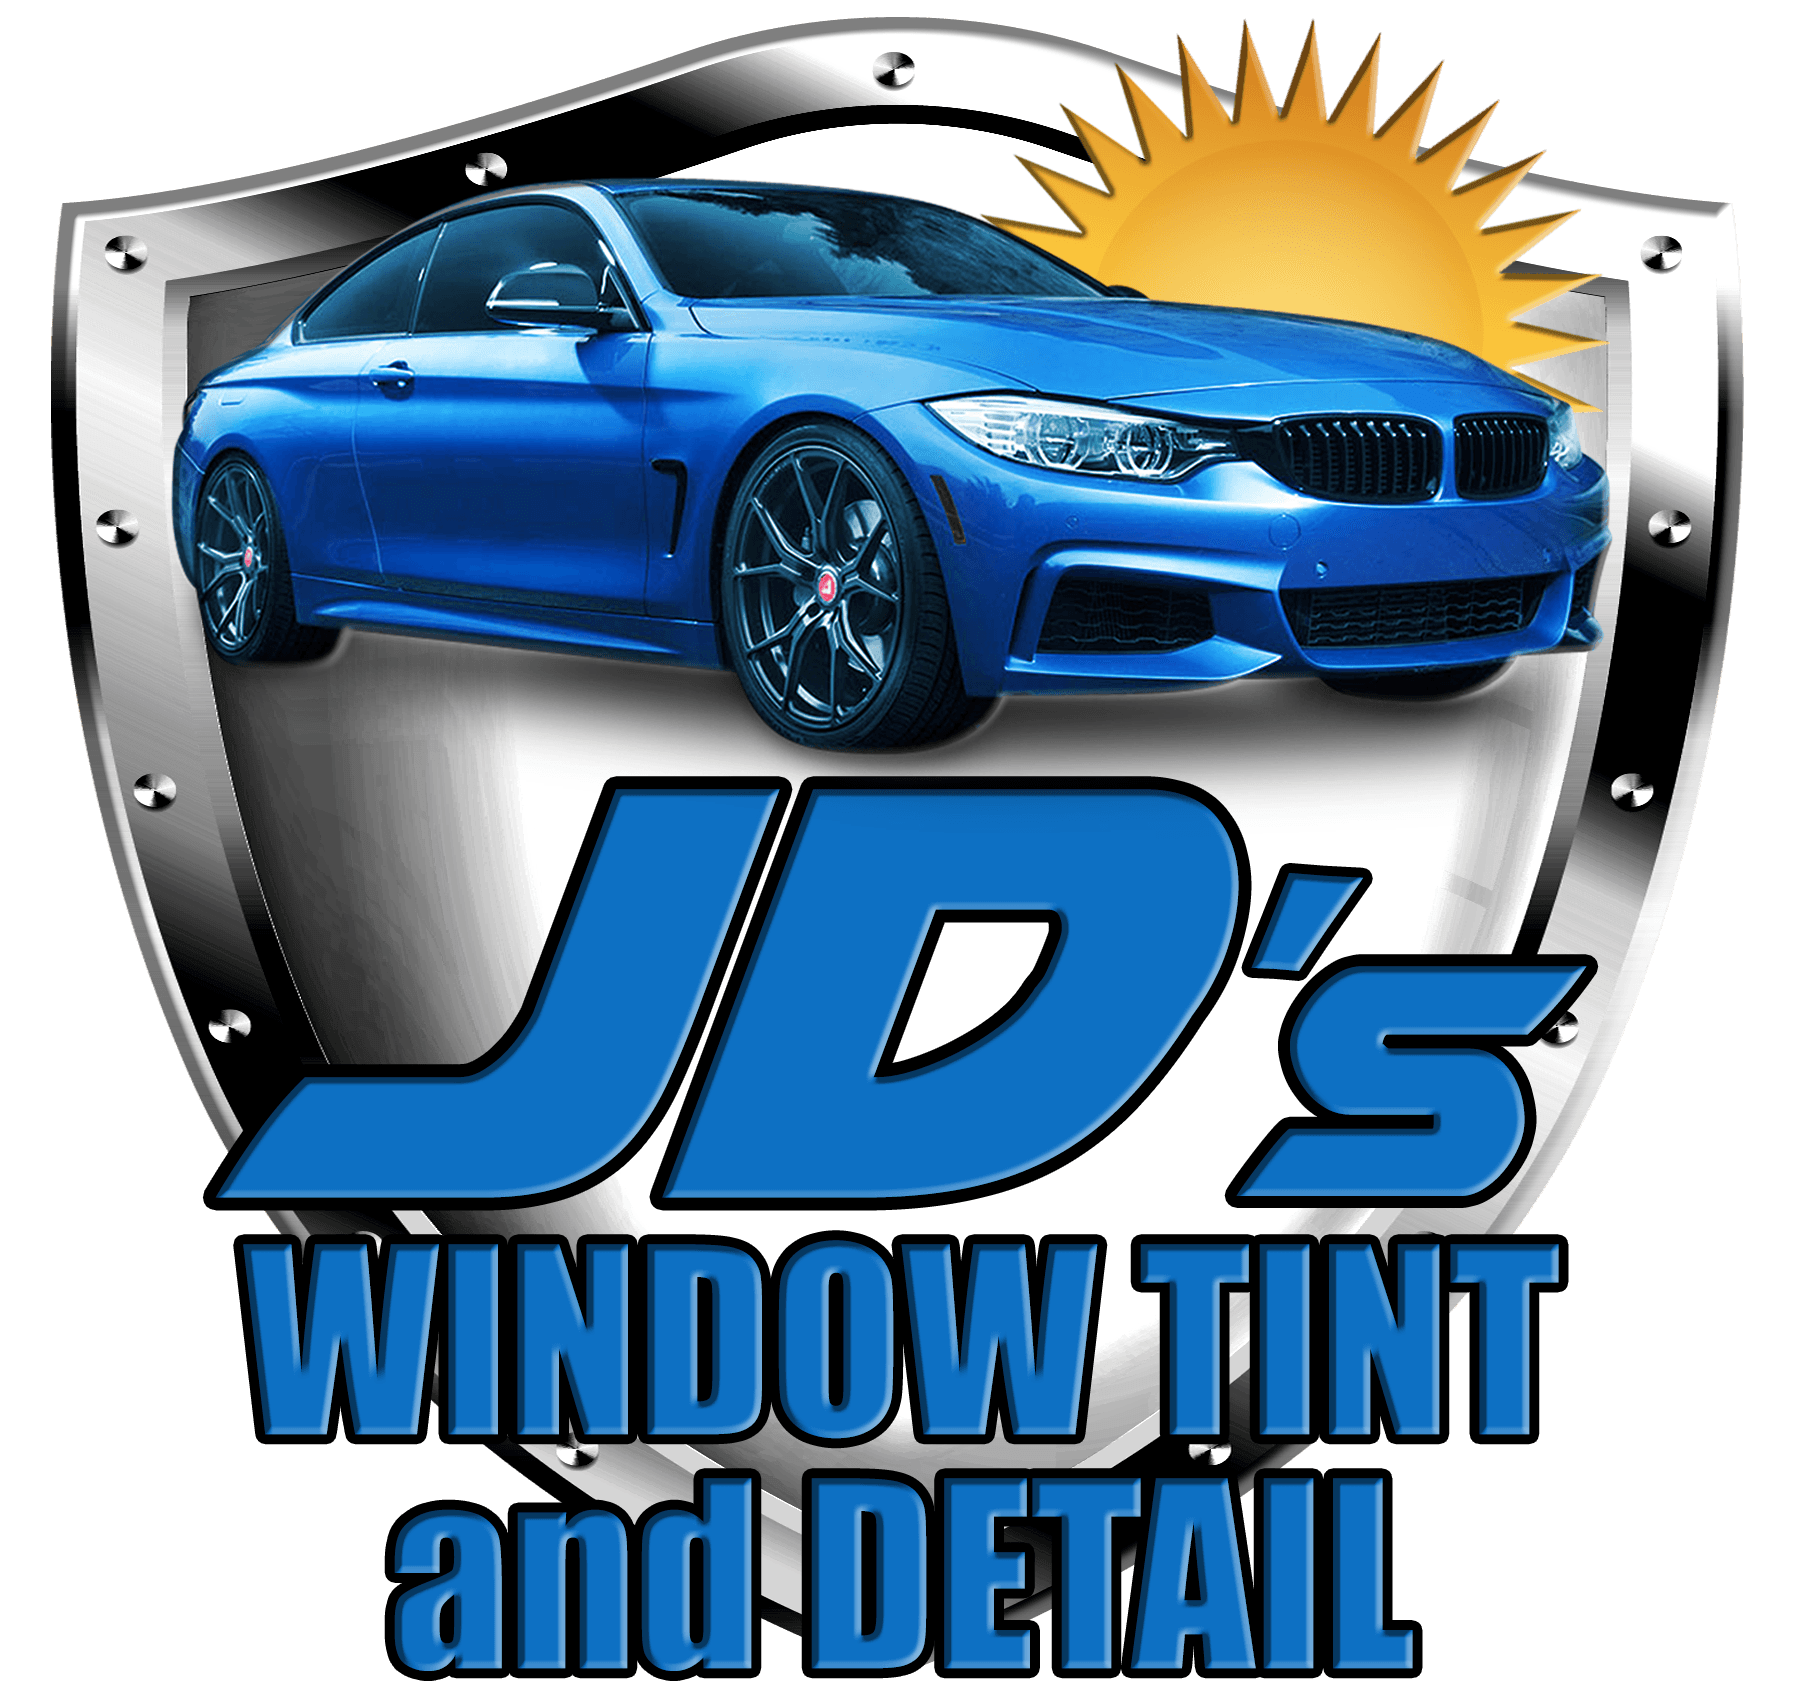 JDs Window Tinting and Detail in Longwood